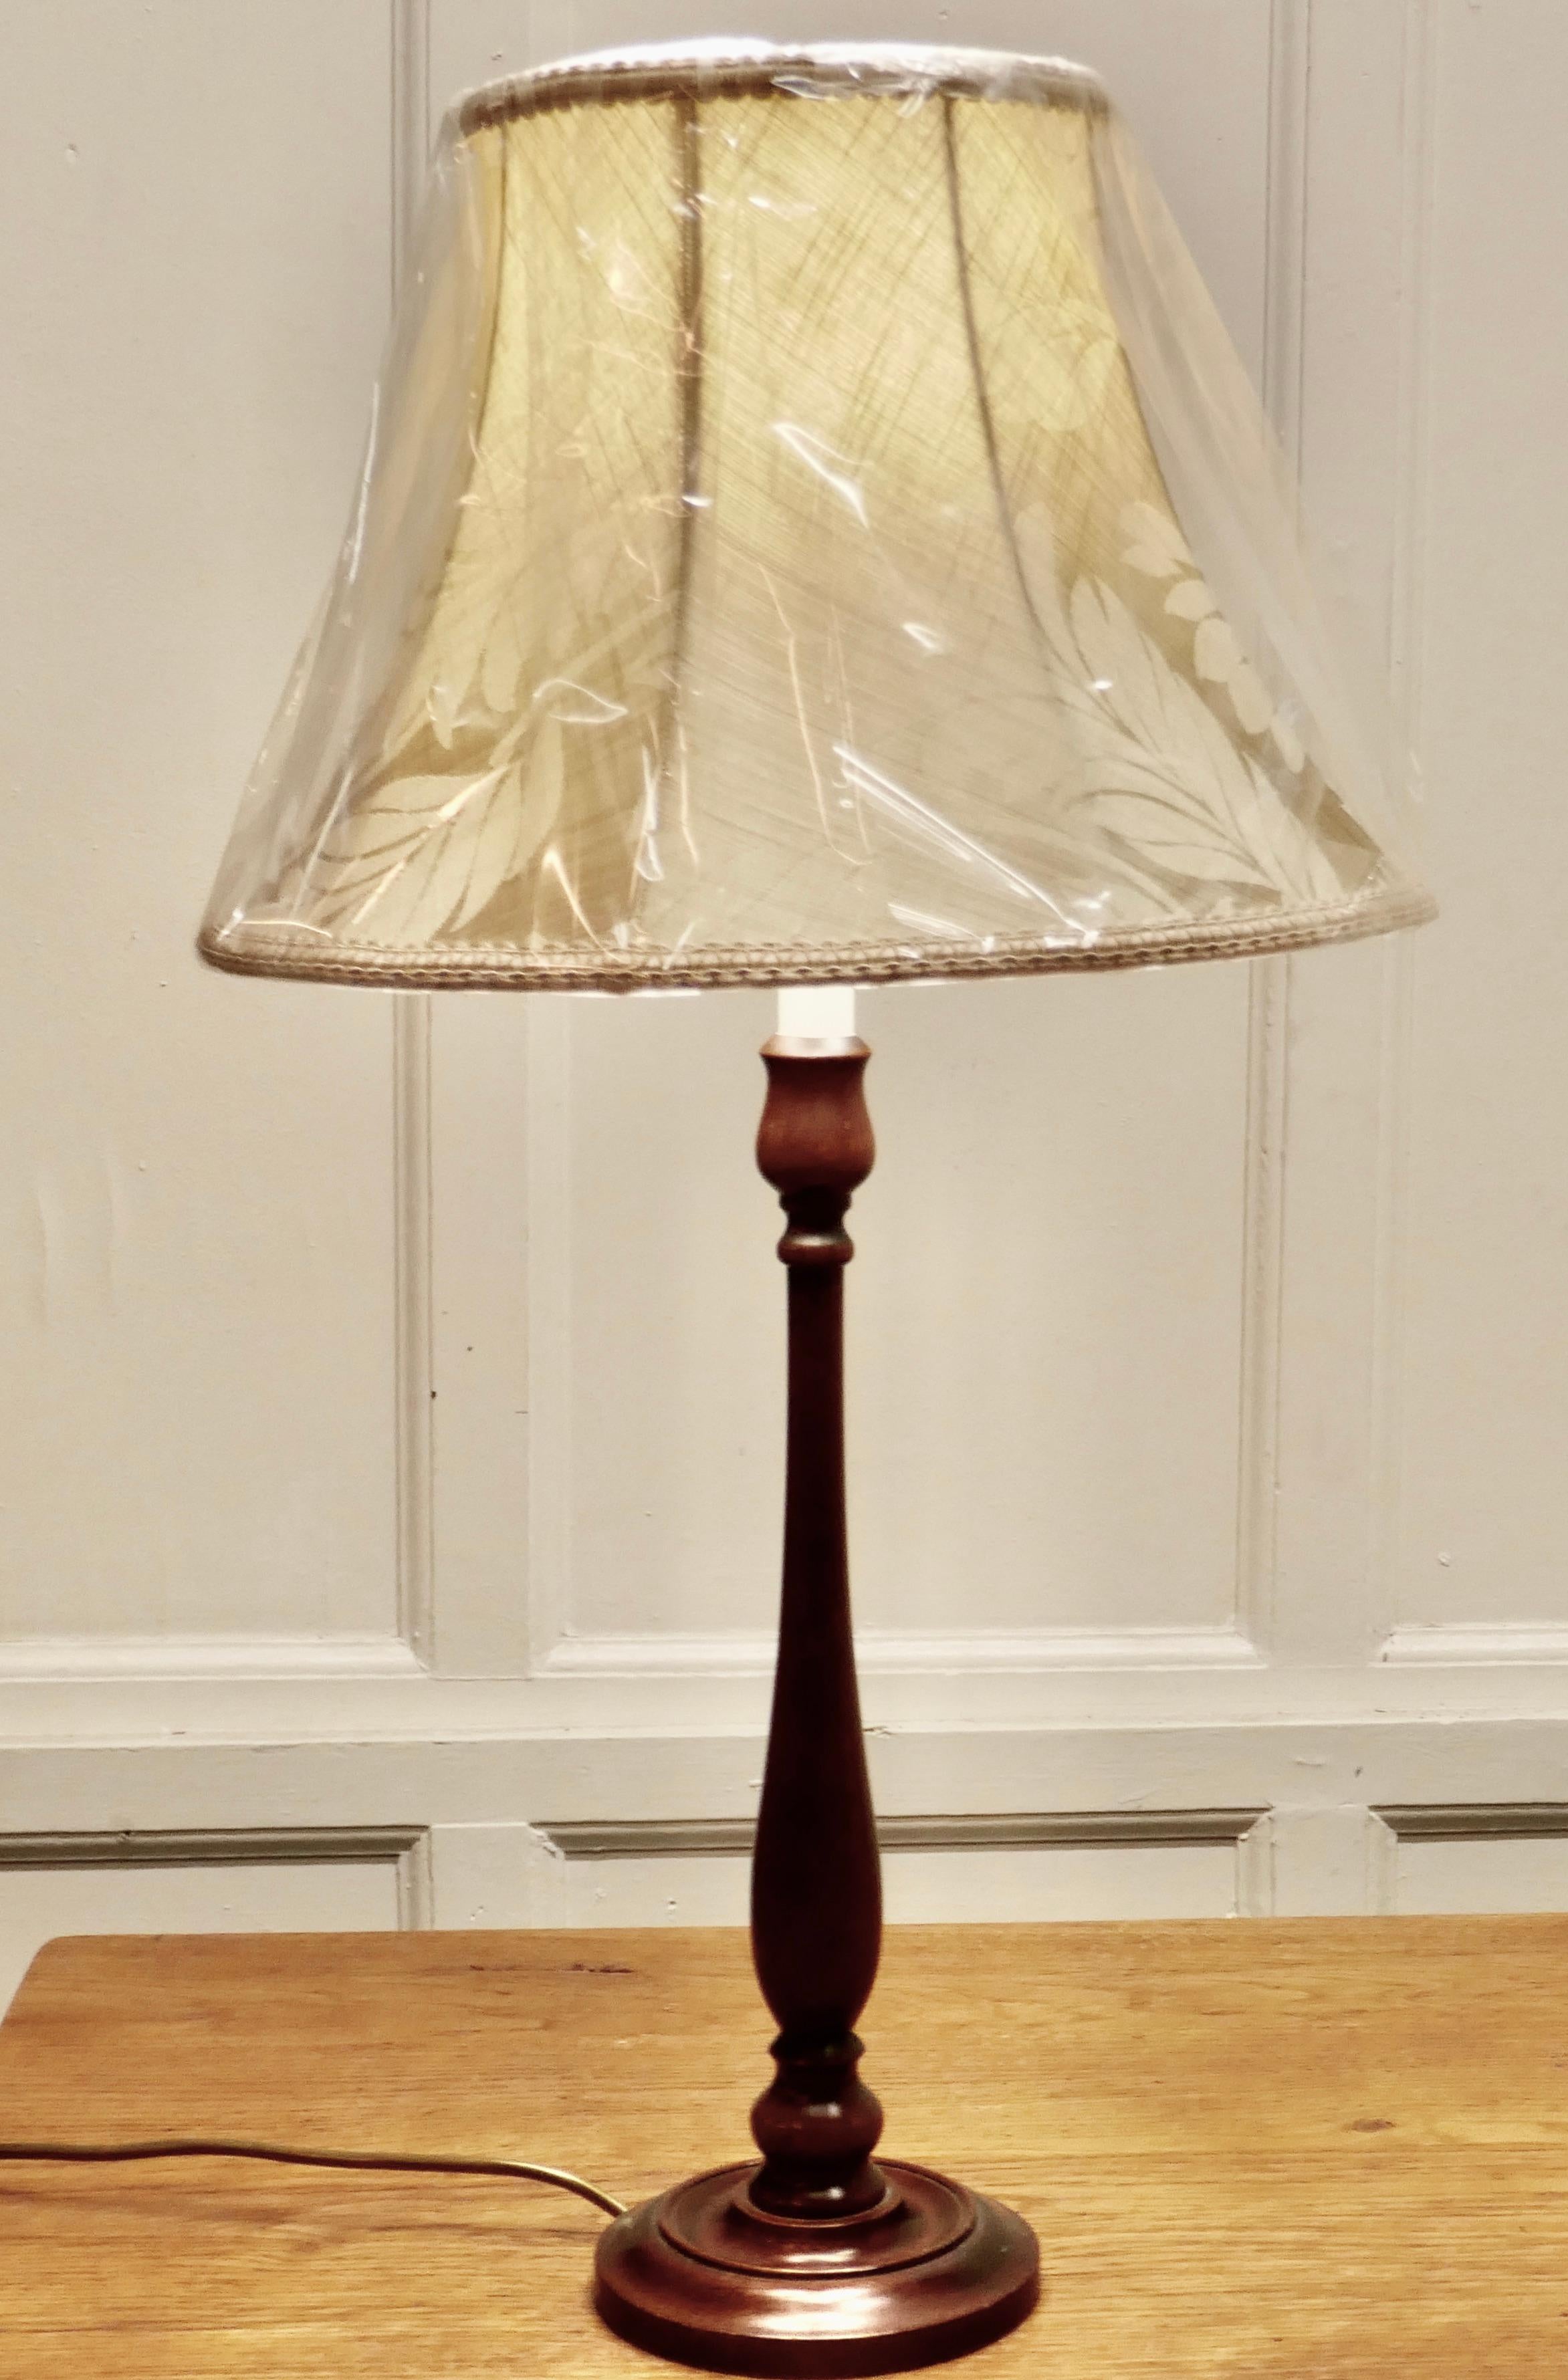 Turned mahogany table lamp

This is an attractive piece in polished mahogany, the lamp stands on a turned wooden base, the upright is lightly turned with a simulated candle at the top
The lamp comes with a new silk shade and is is in good working